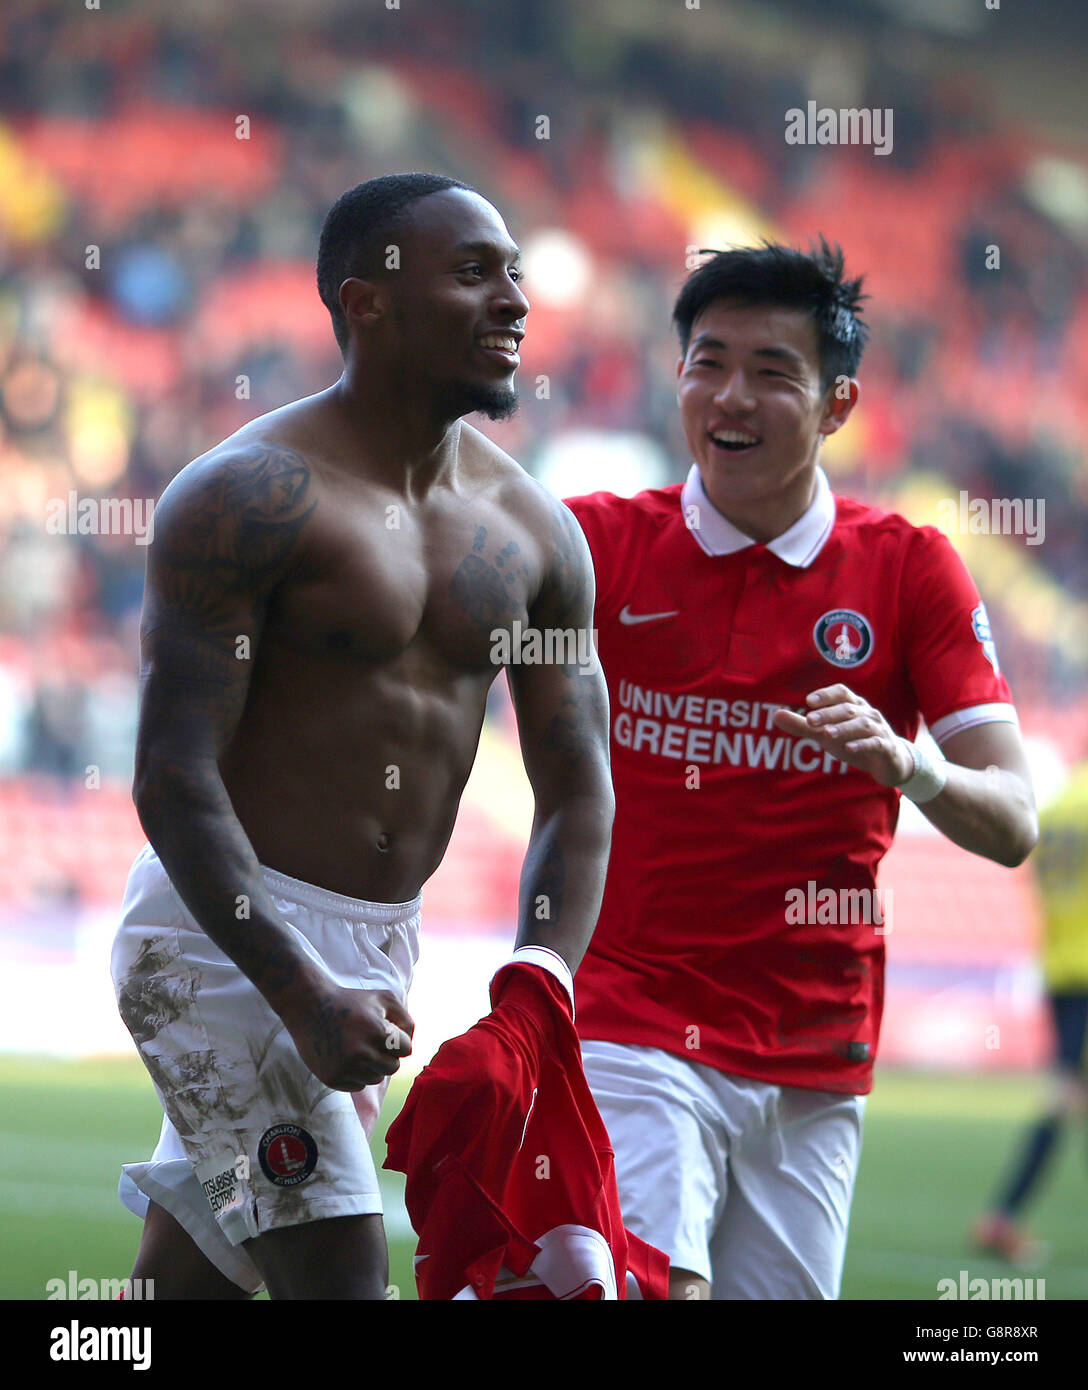 Charlton Athletic v Middlesbrough - Sky Bet Championship - The Valley. Charlton Athletic's Callum Harriott celebrates scoring his side's first goal of the game with teammate Yun Suk-Young Stock Photo